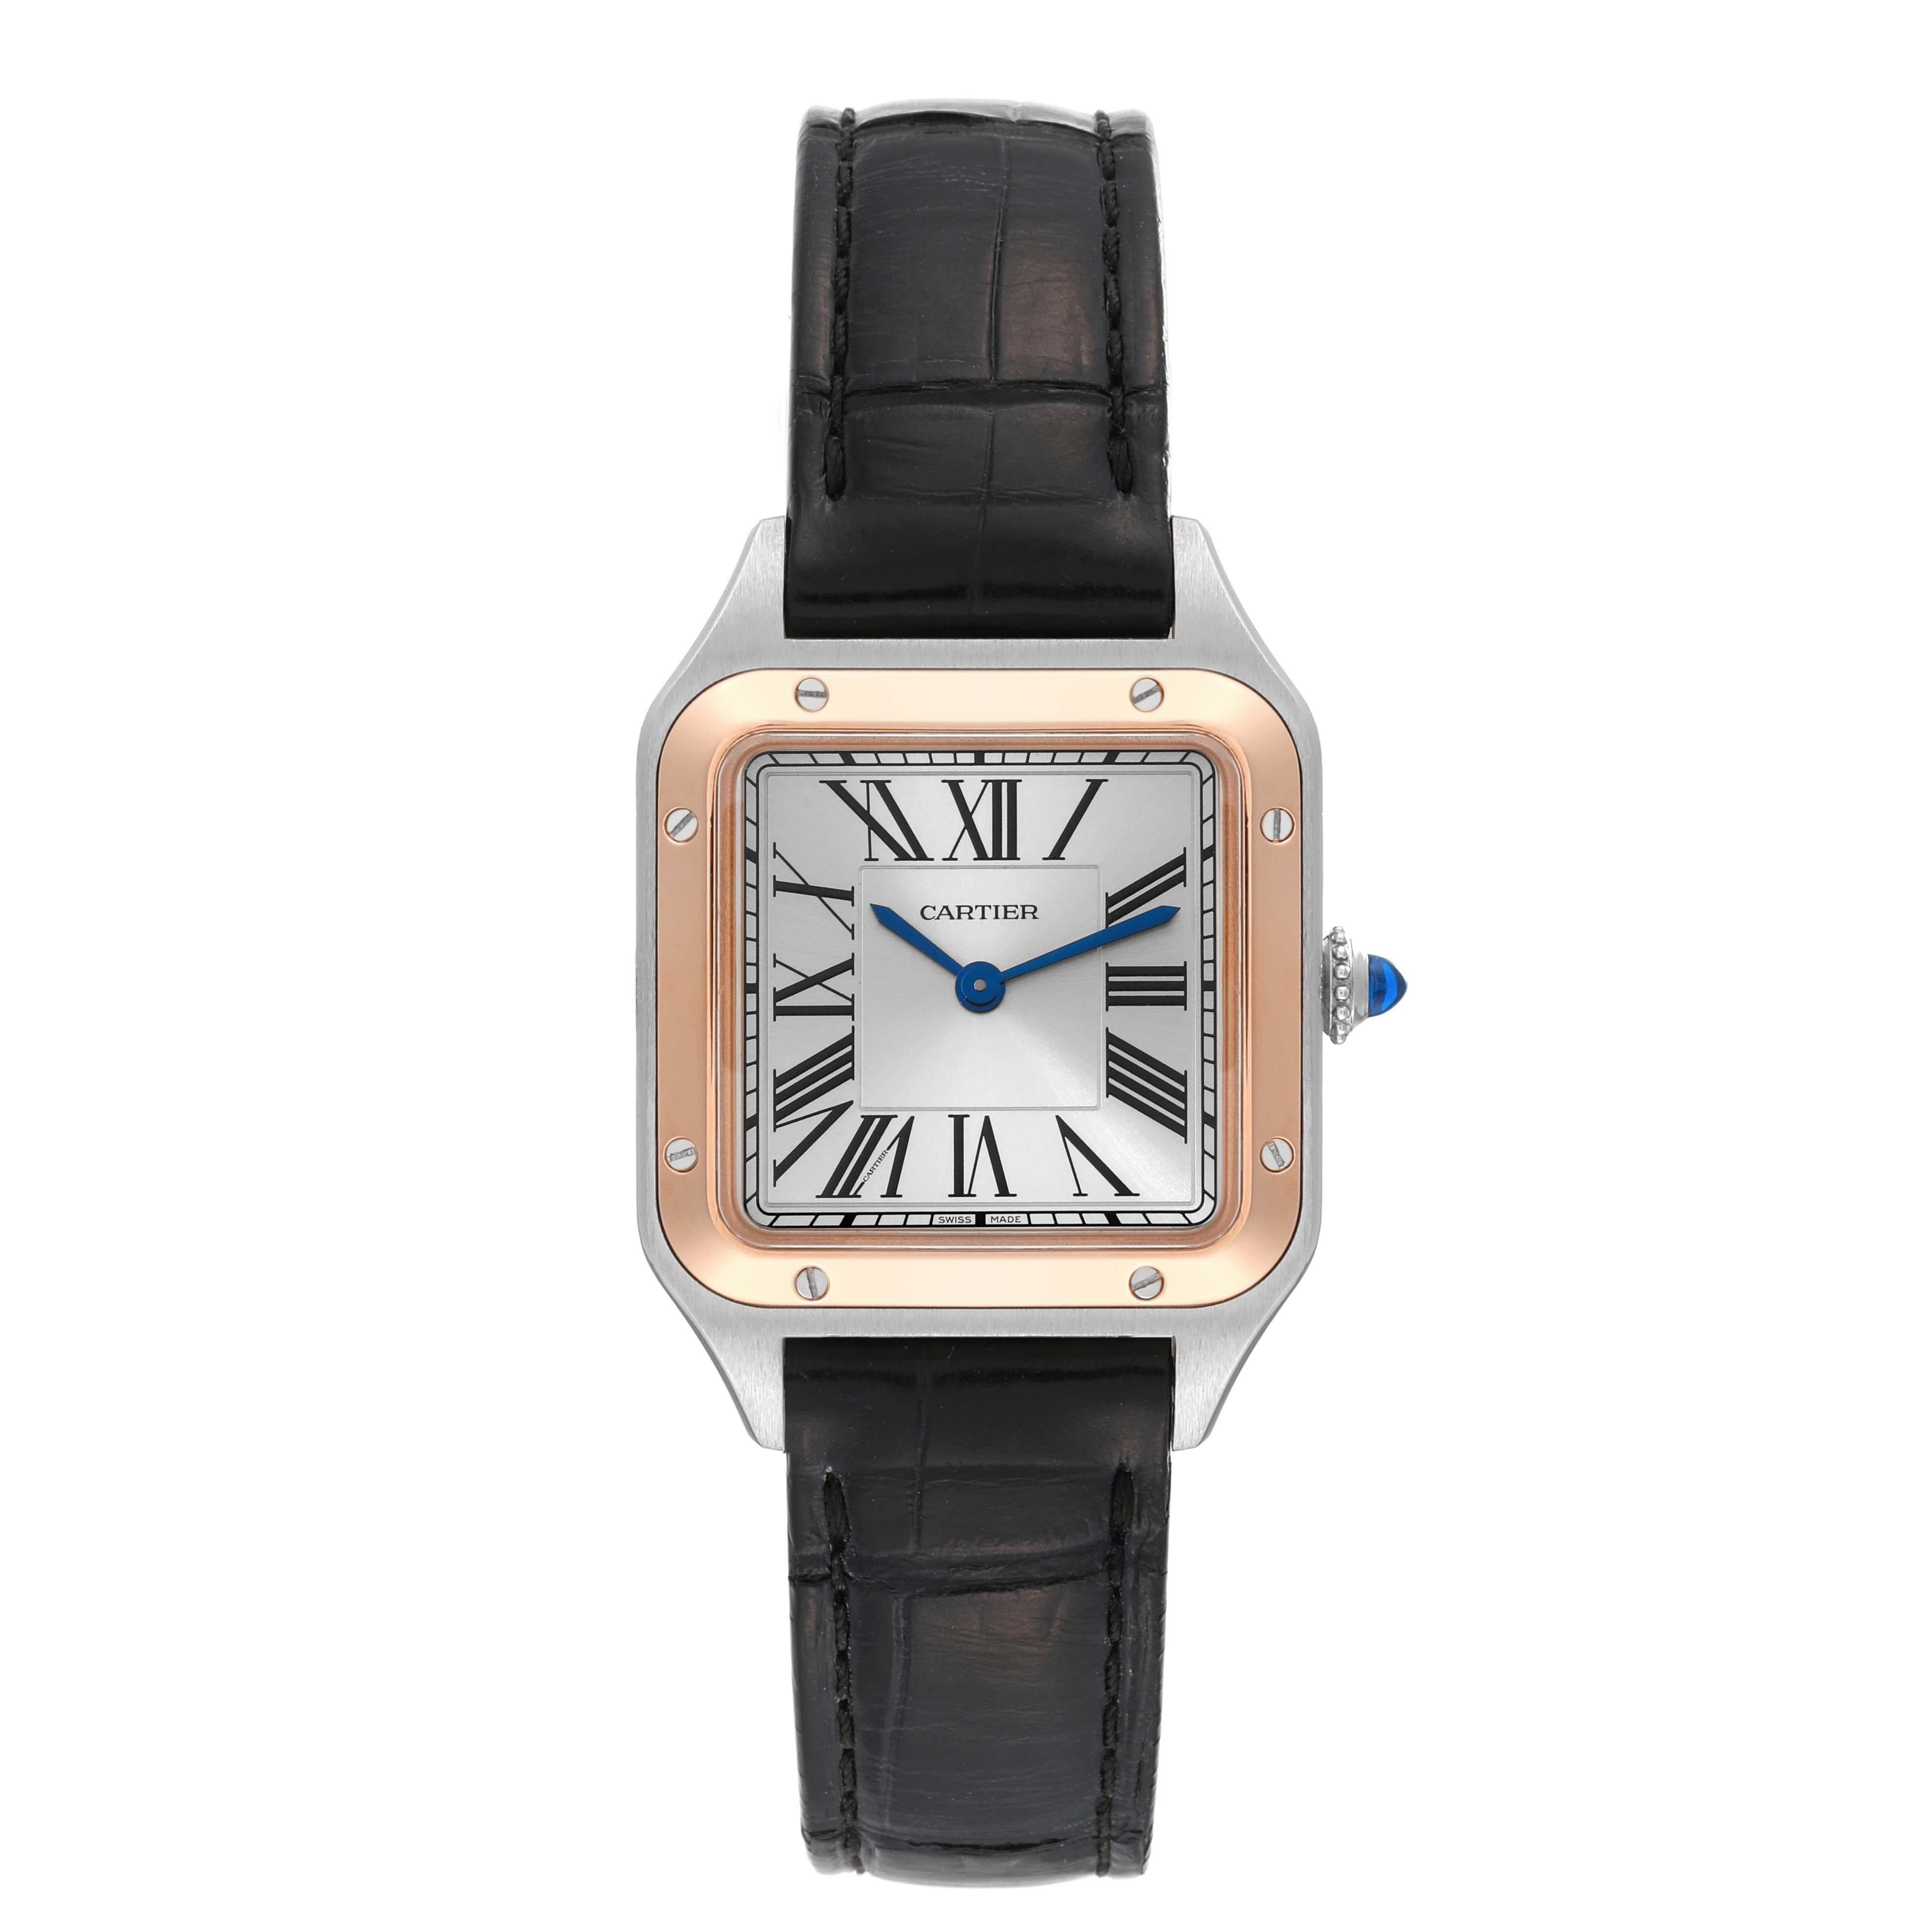 Cartier Santos Dumont Steel Rose Gold Silver Dial Ladies Watch W2SA0012. Quartz movement. Stainless steel case 38 mm x 27.5 mm. Case thickness 7.3 mm. Circular grained crown set with blue spinel cabochon. 18k rose gold bezel punctuated with 8